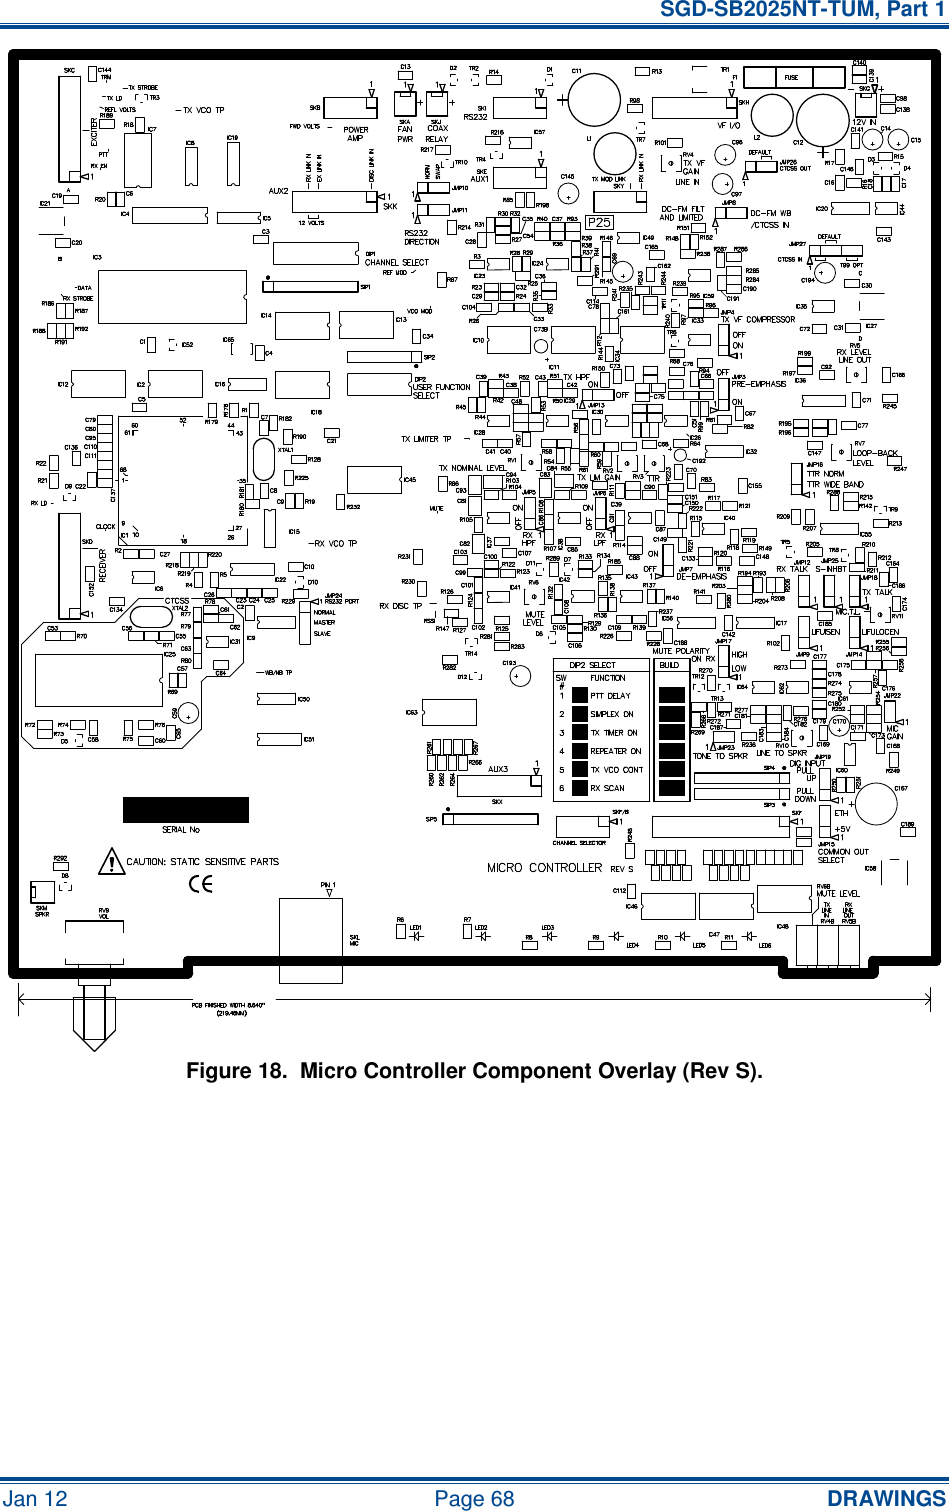   SGD-SB2025NT-TUM, Part 1 Jan 12  Page 68  DRAWINGS Figure 18.  Micro Controller Component Overlay (Rev S).    